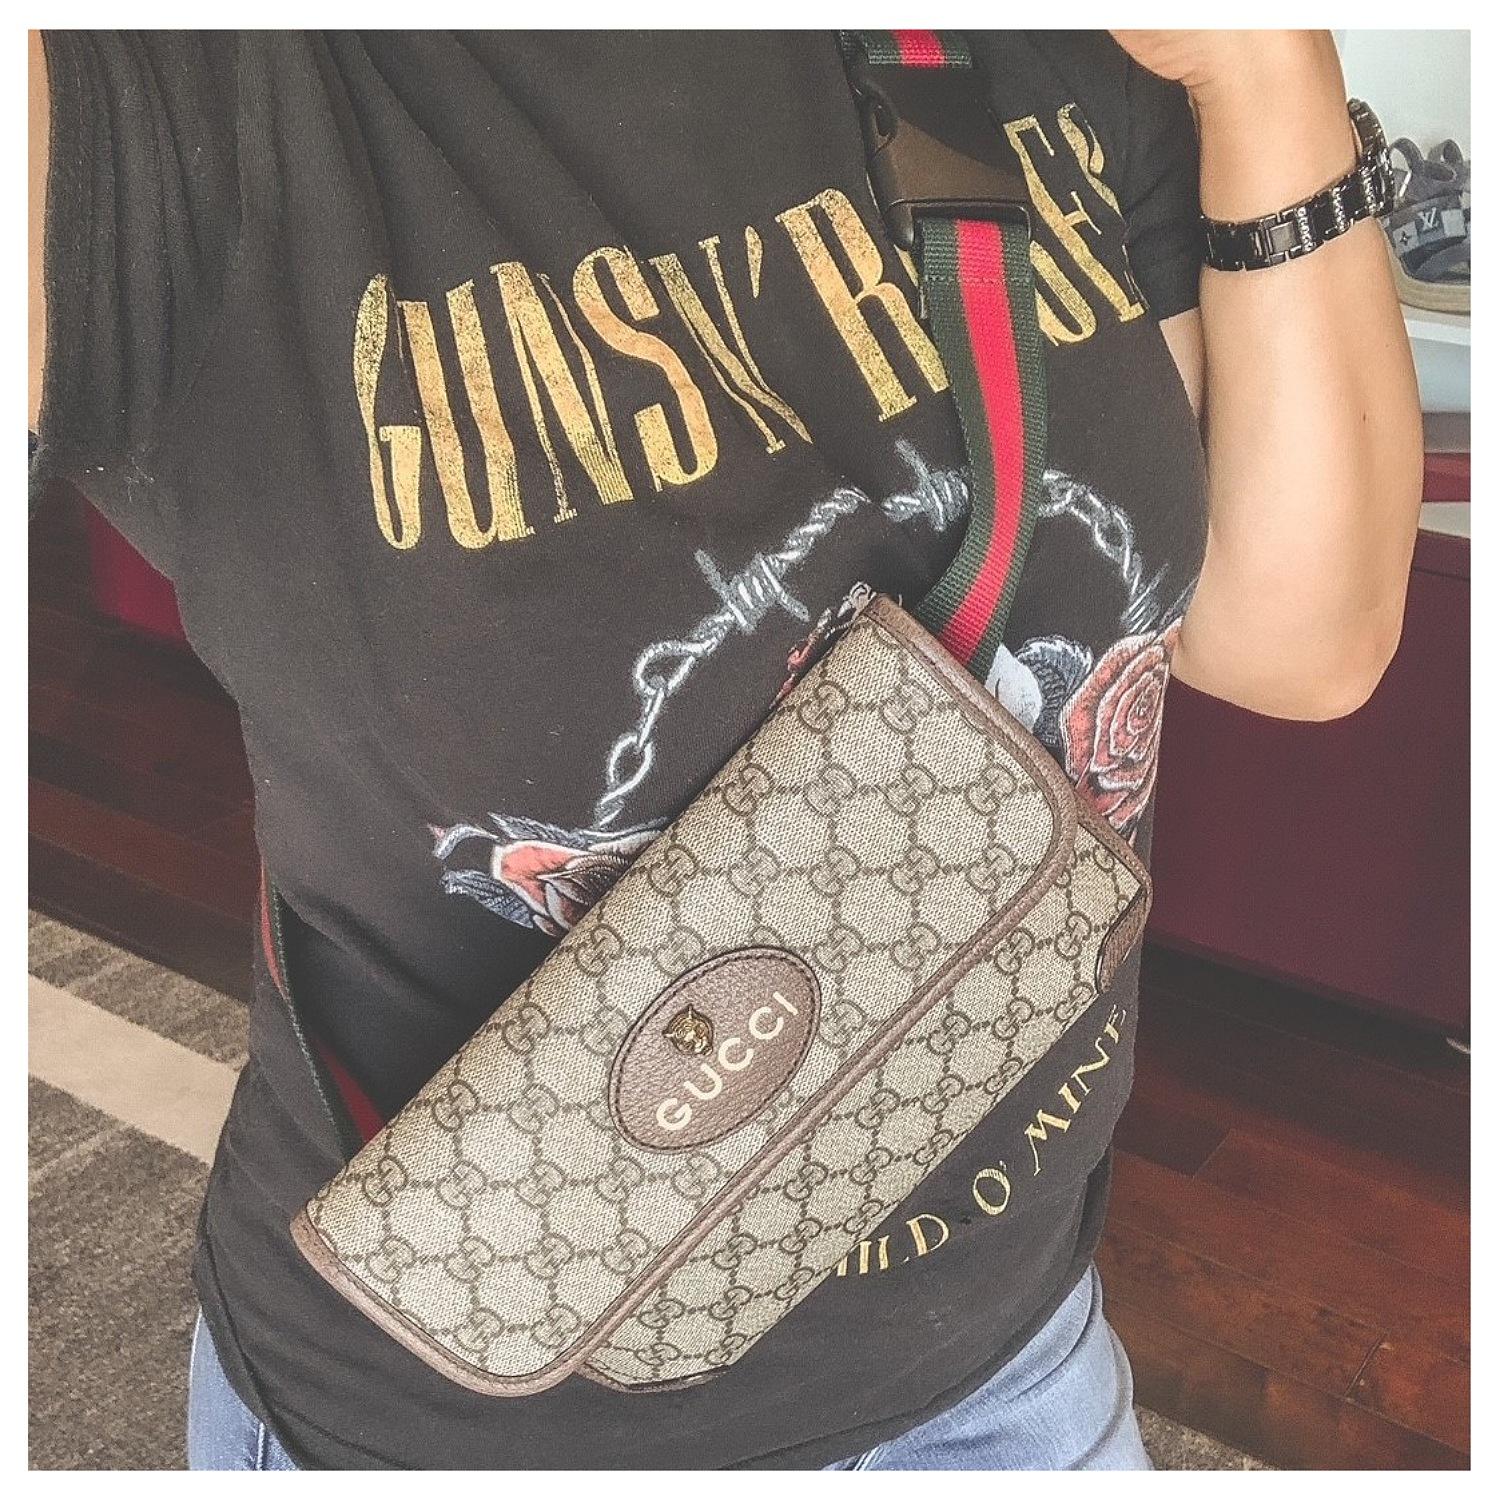 The belt bag in GG Supreme has a retro influenced design. Trimmed with leather, the style is meant to be worn along the waist, secured with a Web strap and buckle closure. Features an oval Gucci leather tag with feline head. Can be worn as a belt